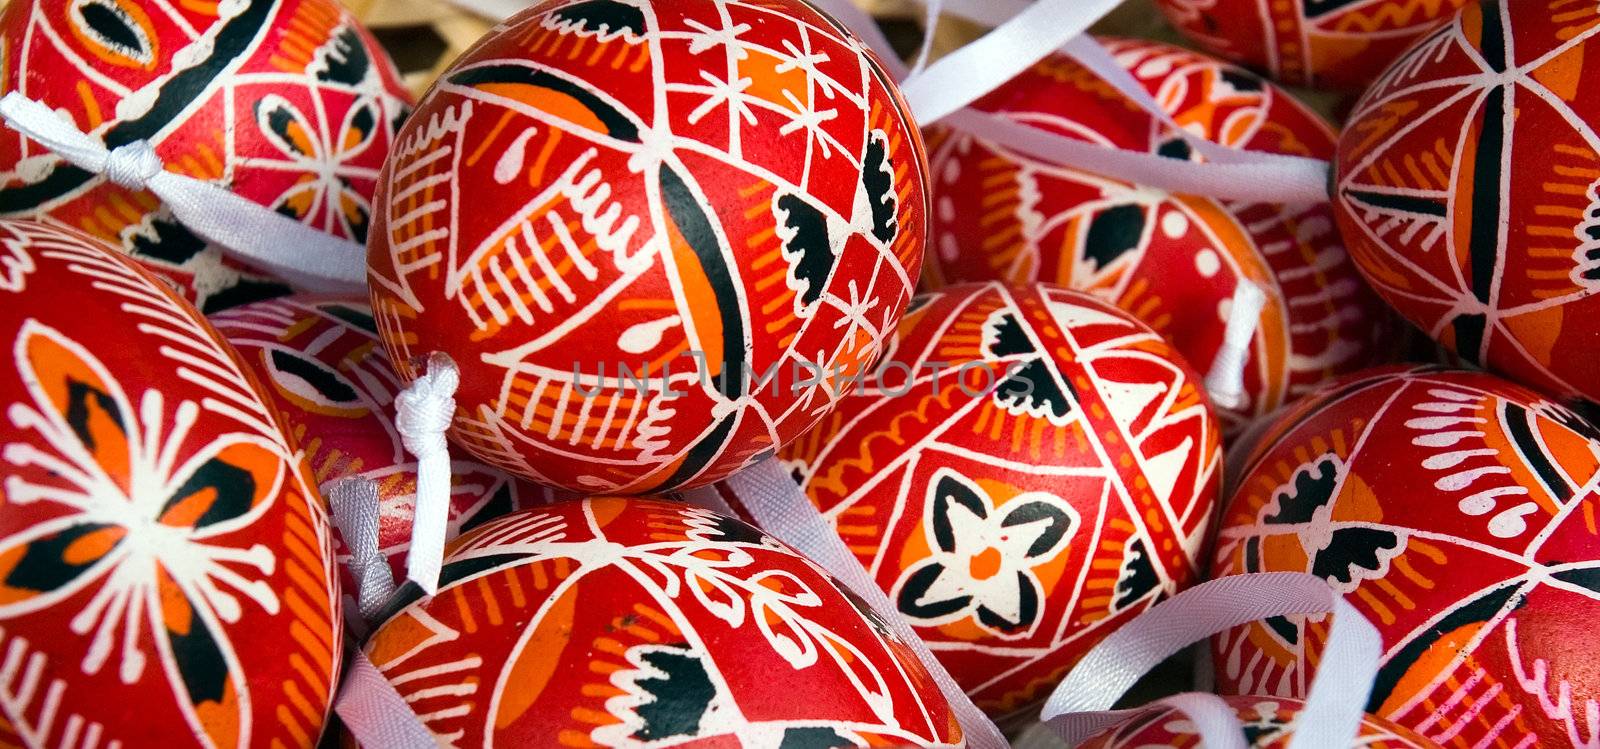 Decorative easter eggs by fyletto